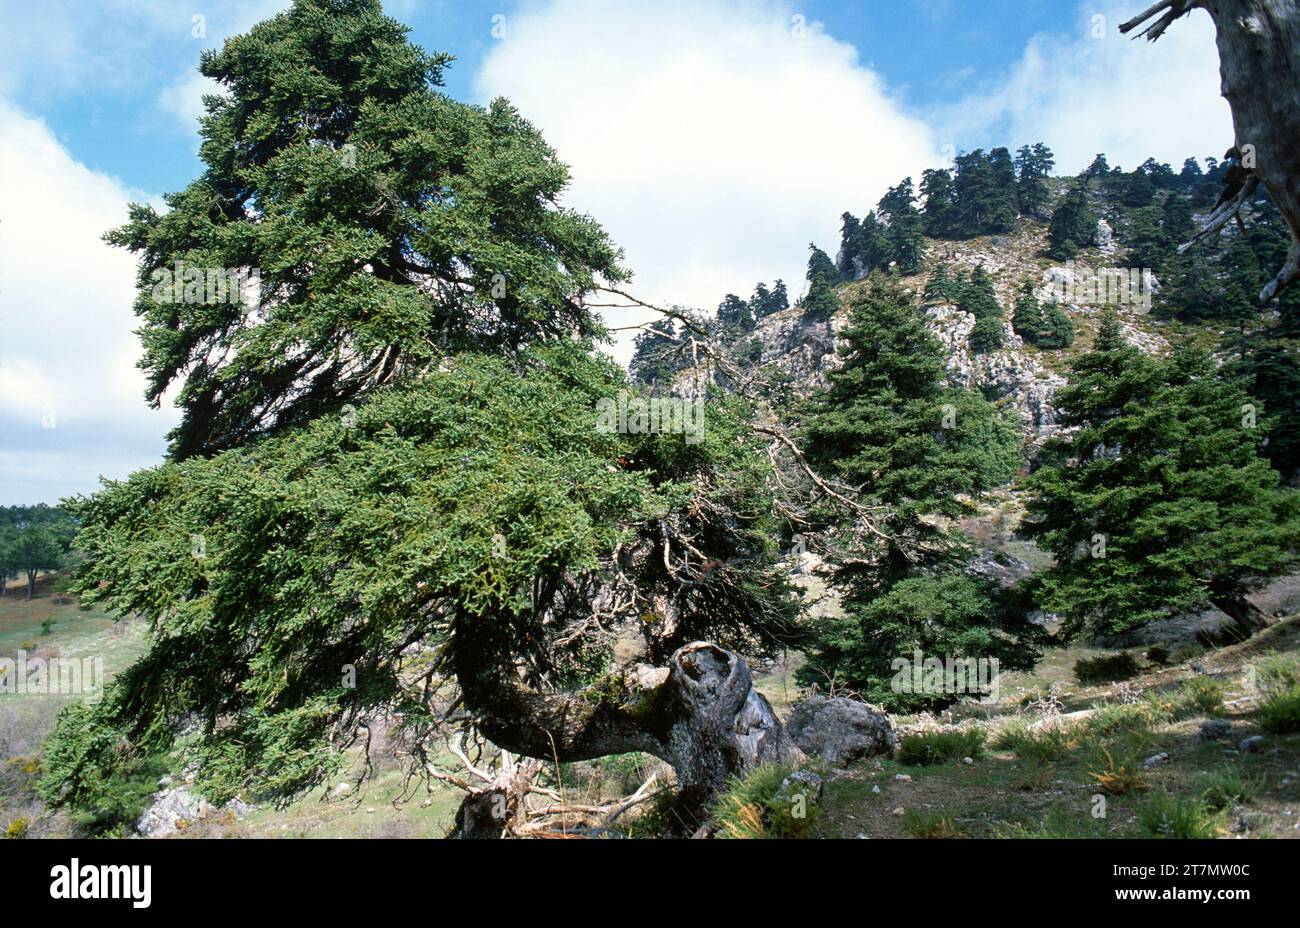 Spanish fir or pinsapo (Abies pinsapo) evergreen tree endemic to Mountains of Cadiz and Malaga. This photo was taken in Los Quejigales, Sierra de las Stock Photo